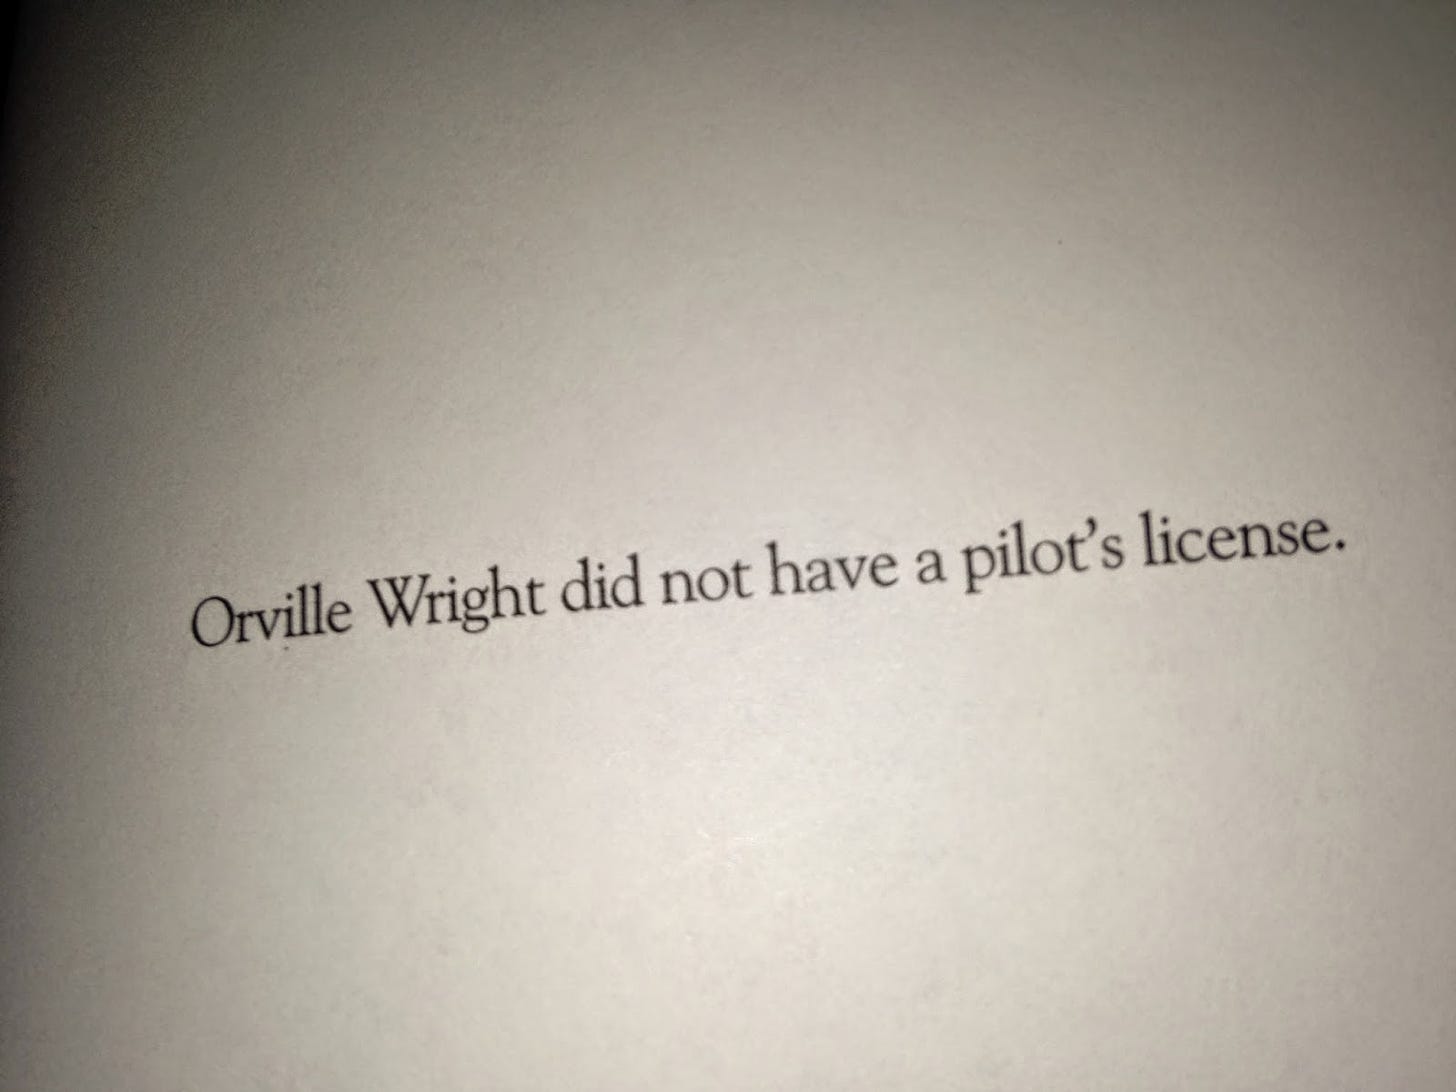 "Orville Wright did not have a pilot's license."